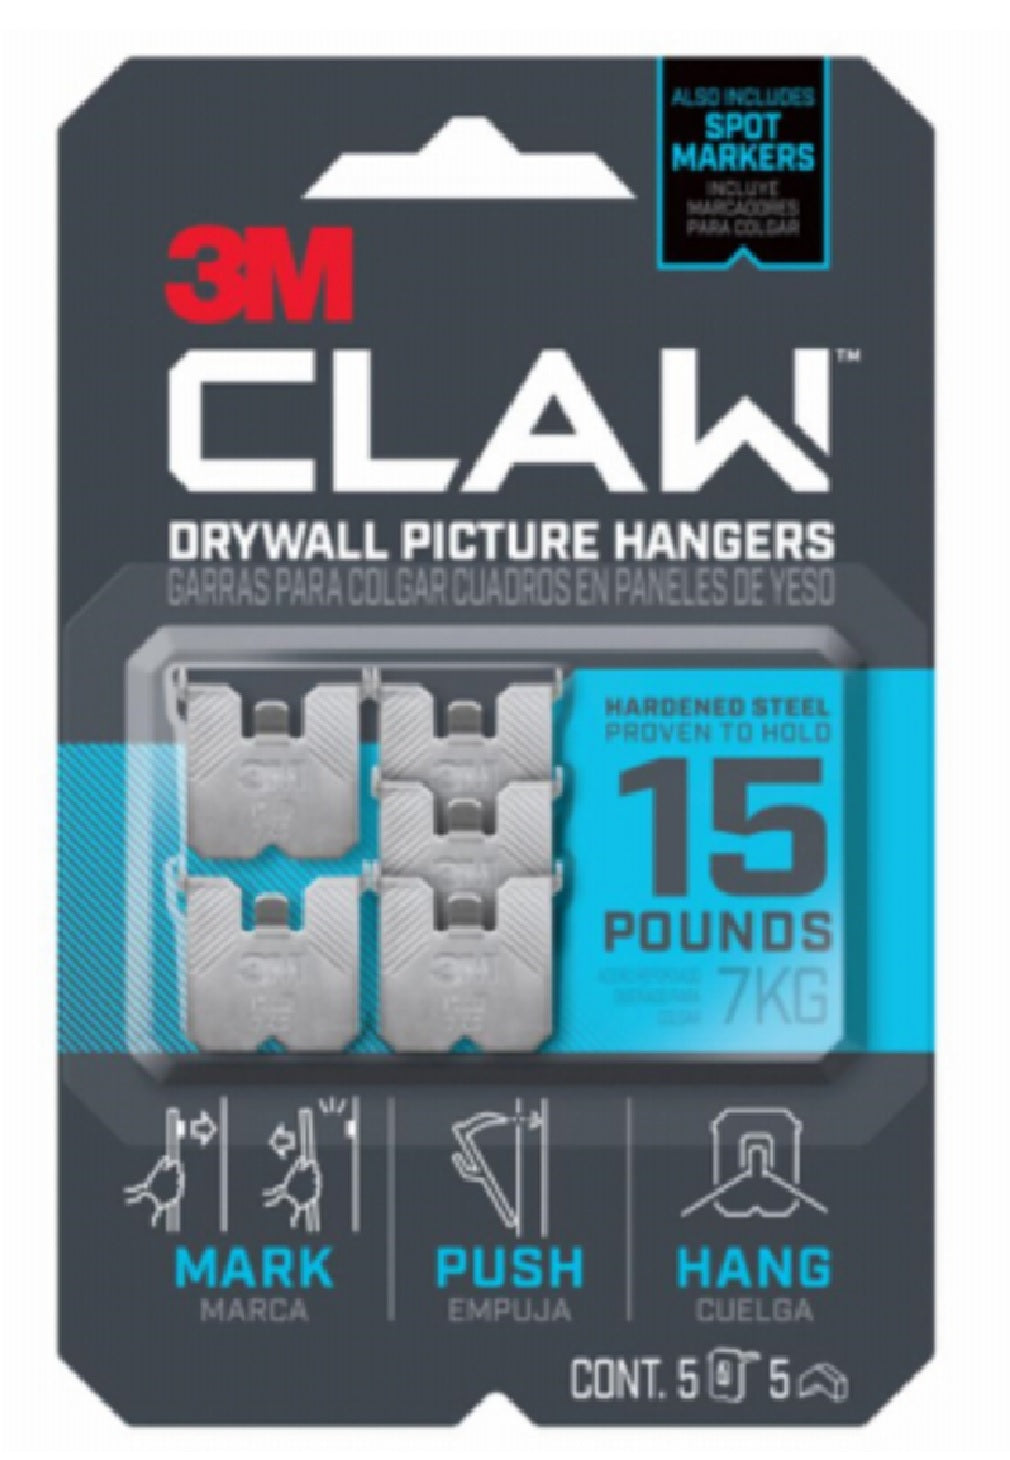 3M 3PH15M-5ES CLAW Drywall Picture Hanger, 15 Lb